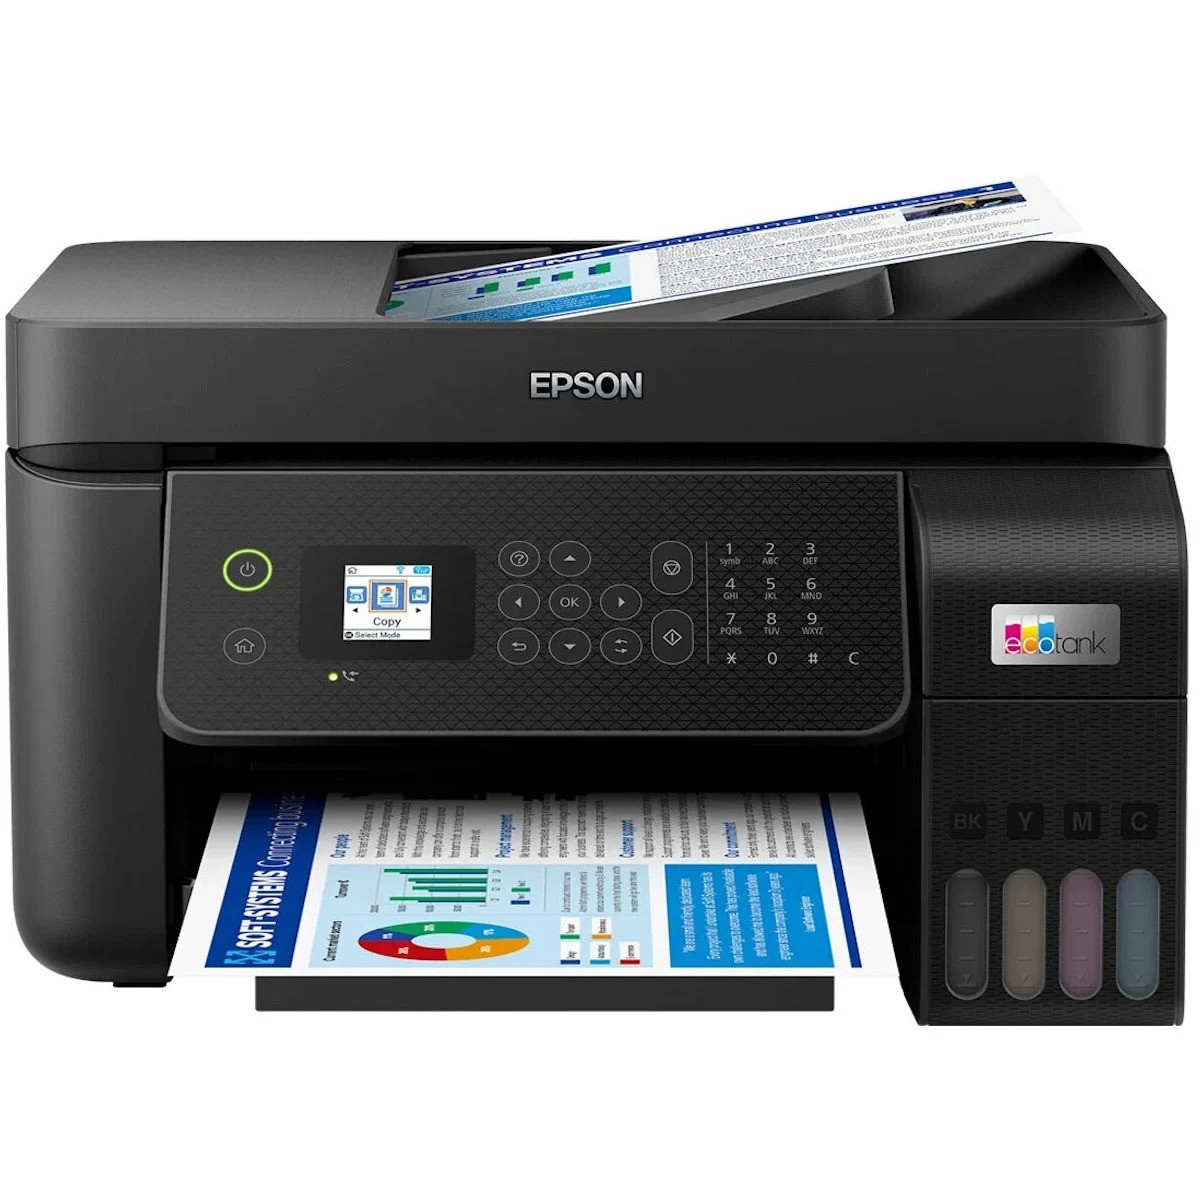 How To Fix A Communication Error On Epson Printer